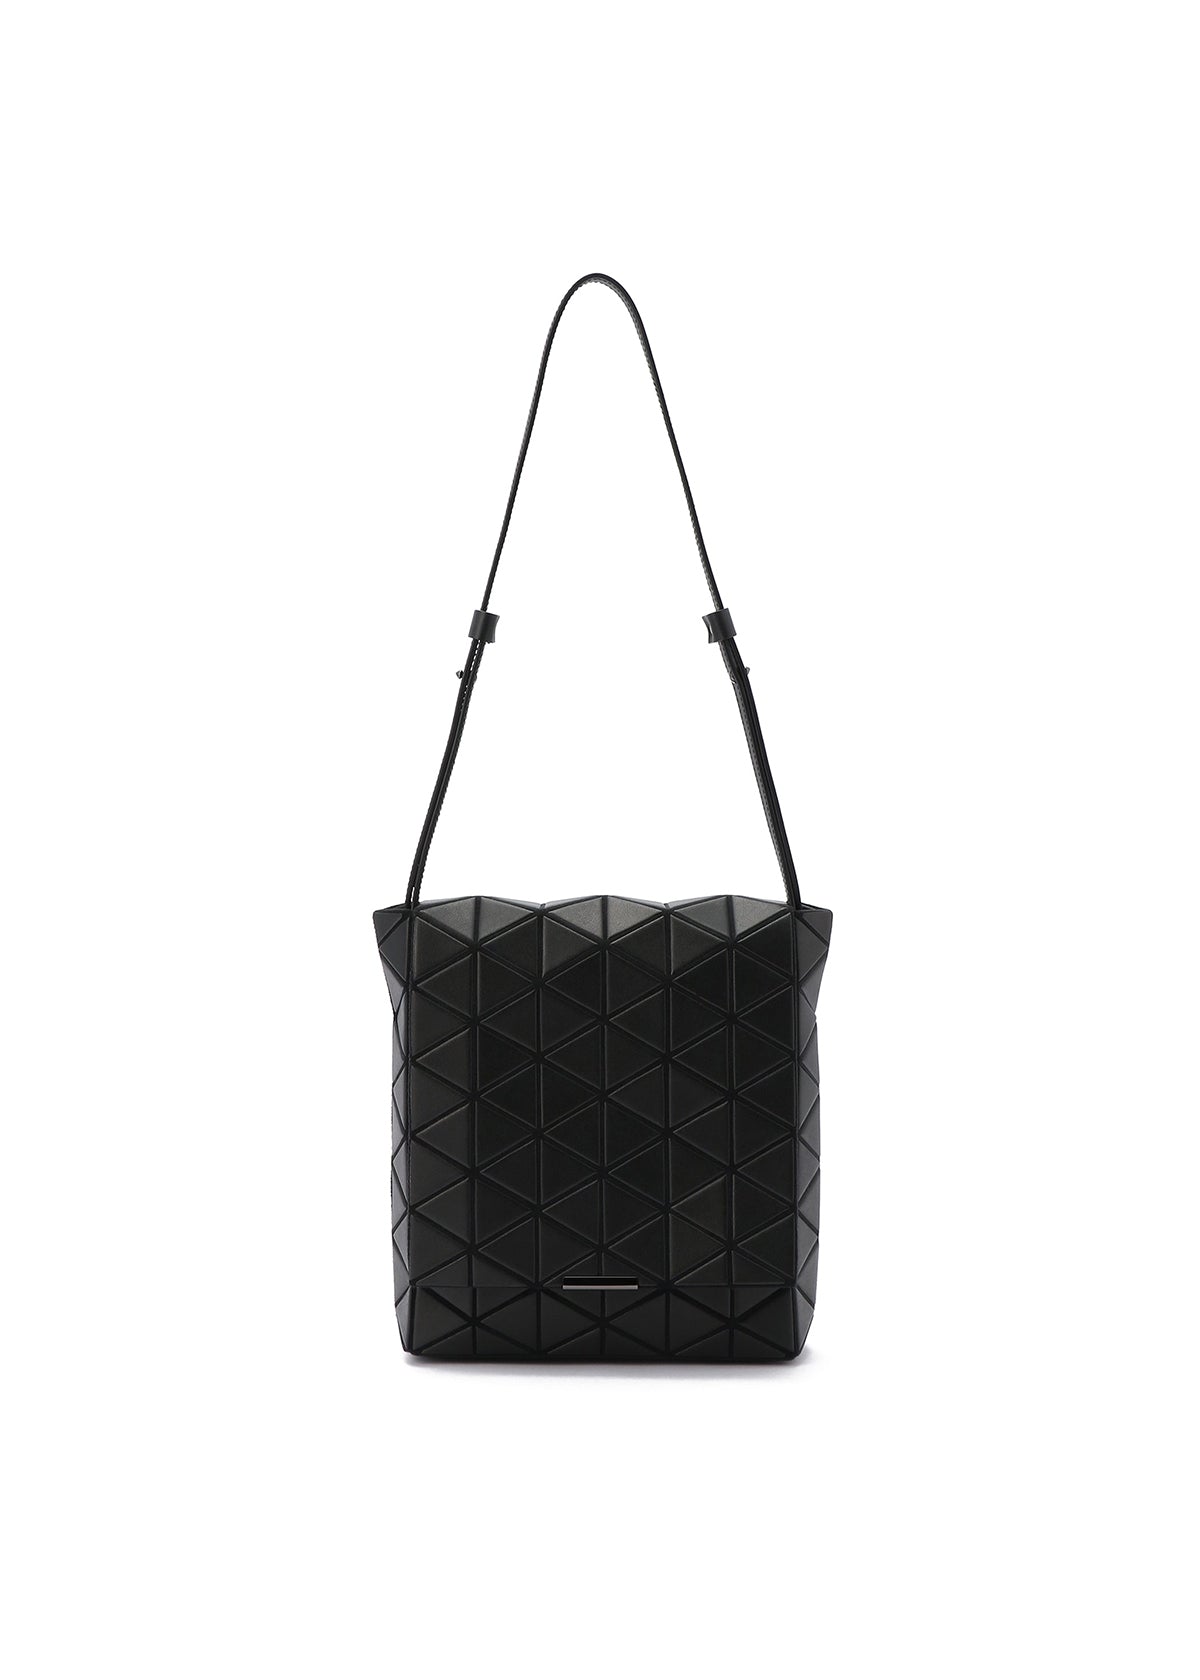 FLAP SHOULDER BAG | The official ISSEY MIYAKE ONLINE STORE